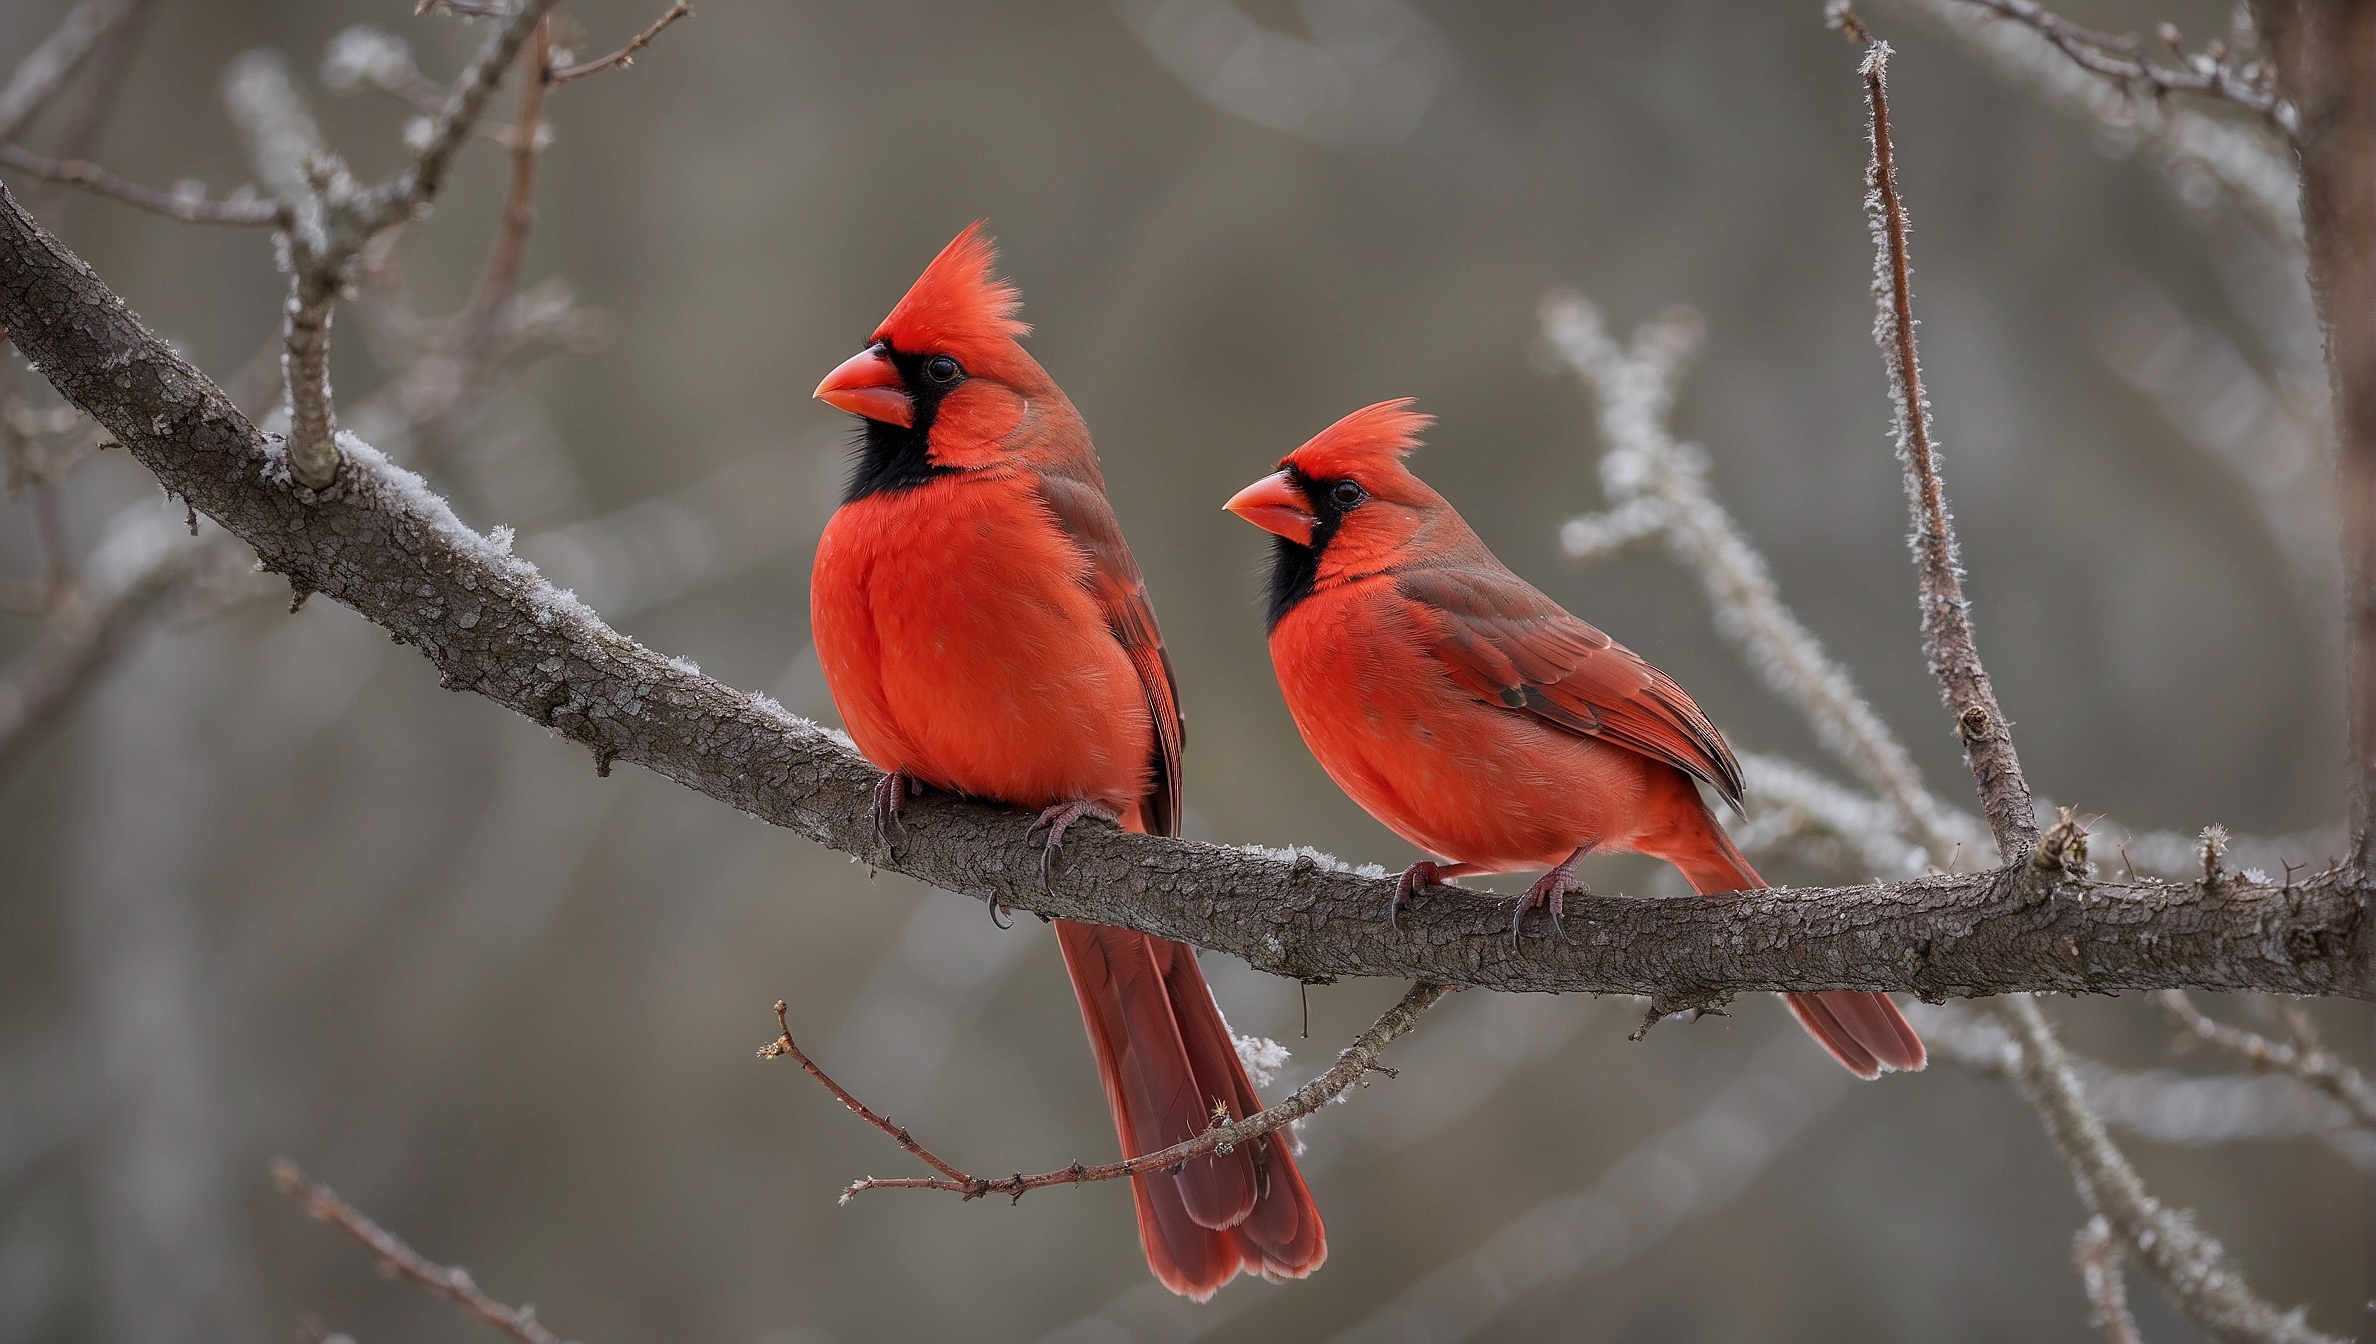 How Long Do Red Cardinals Live?